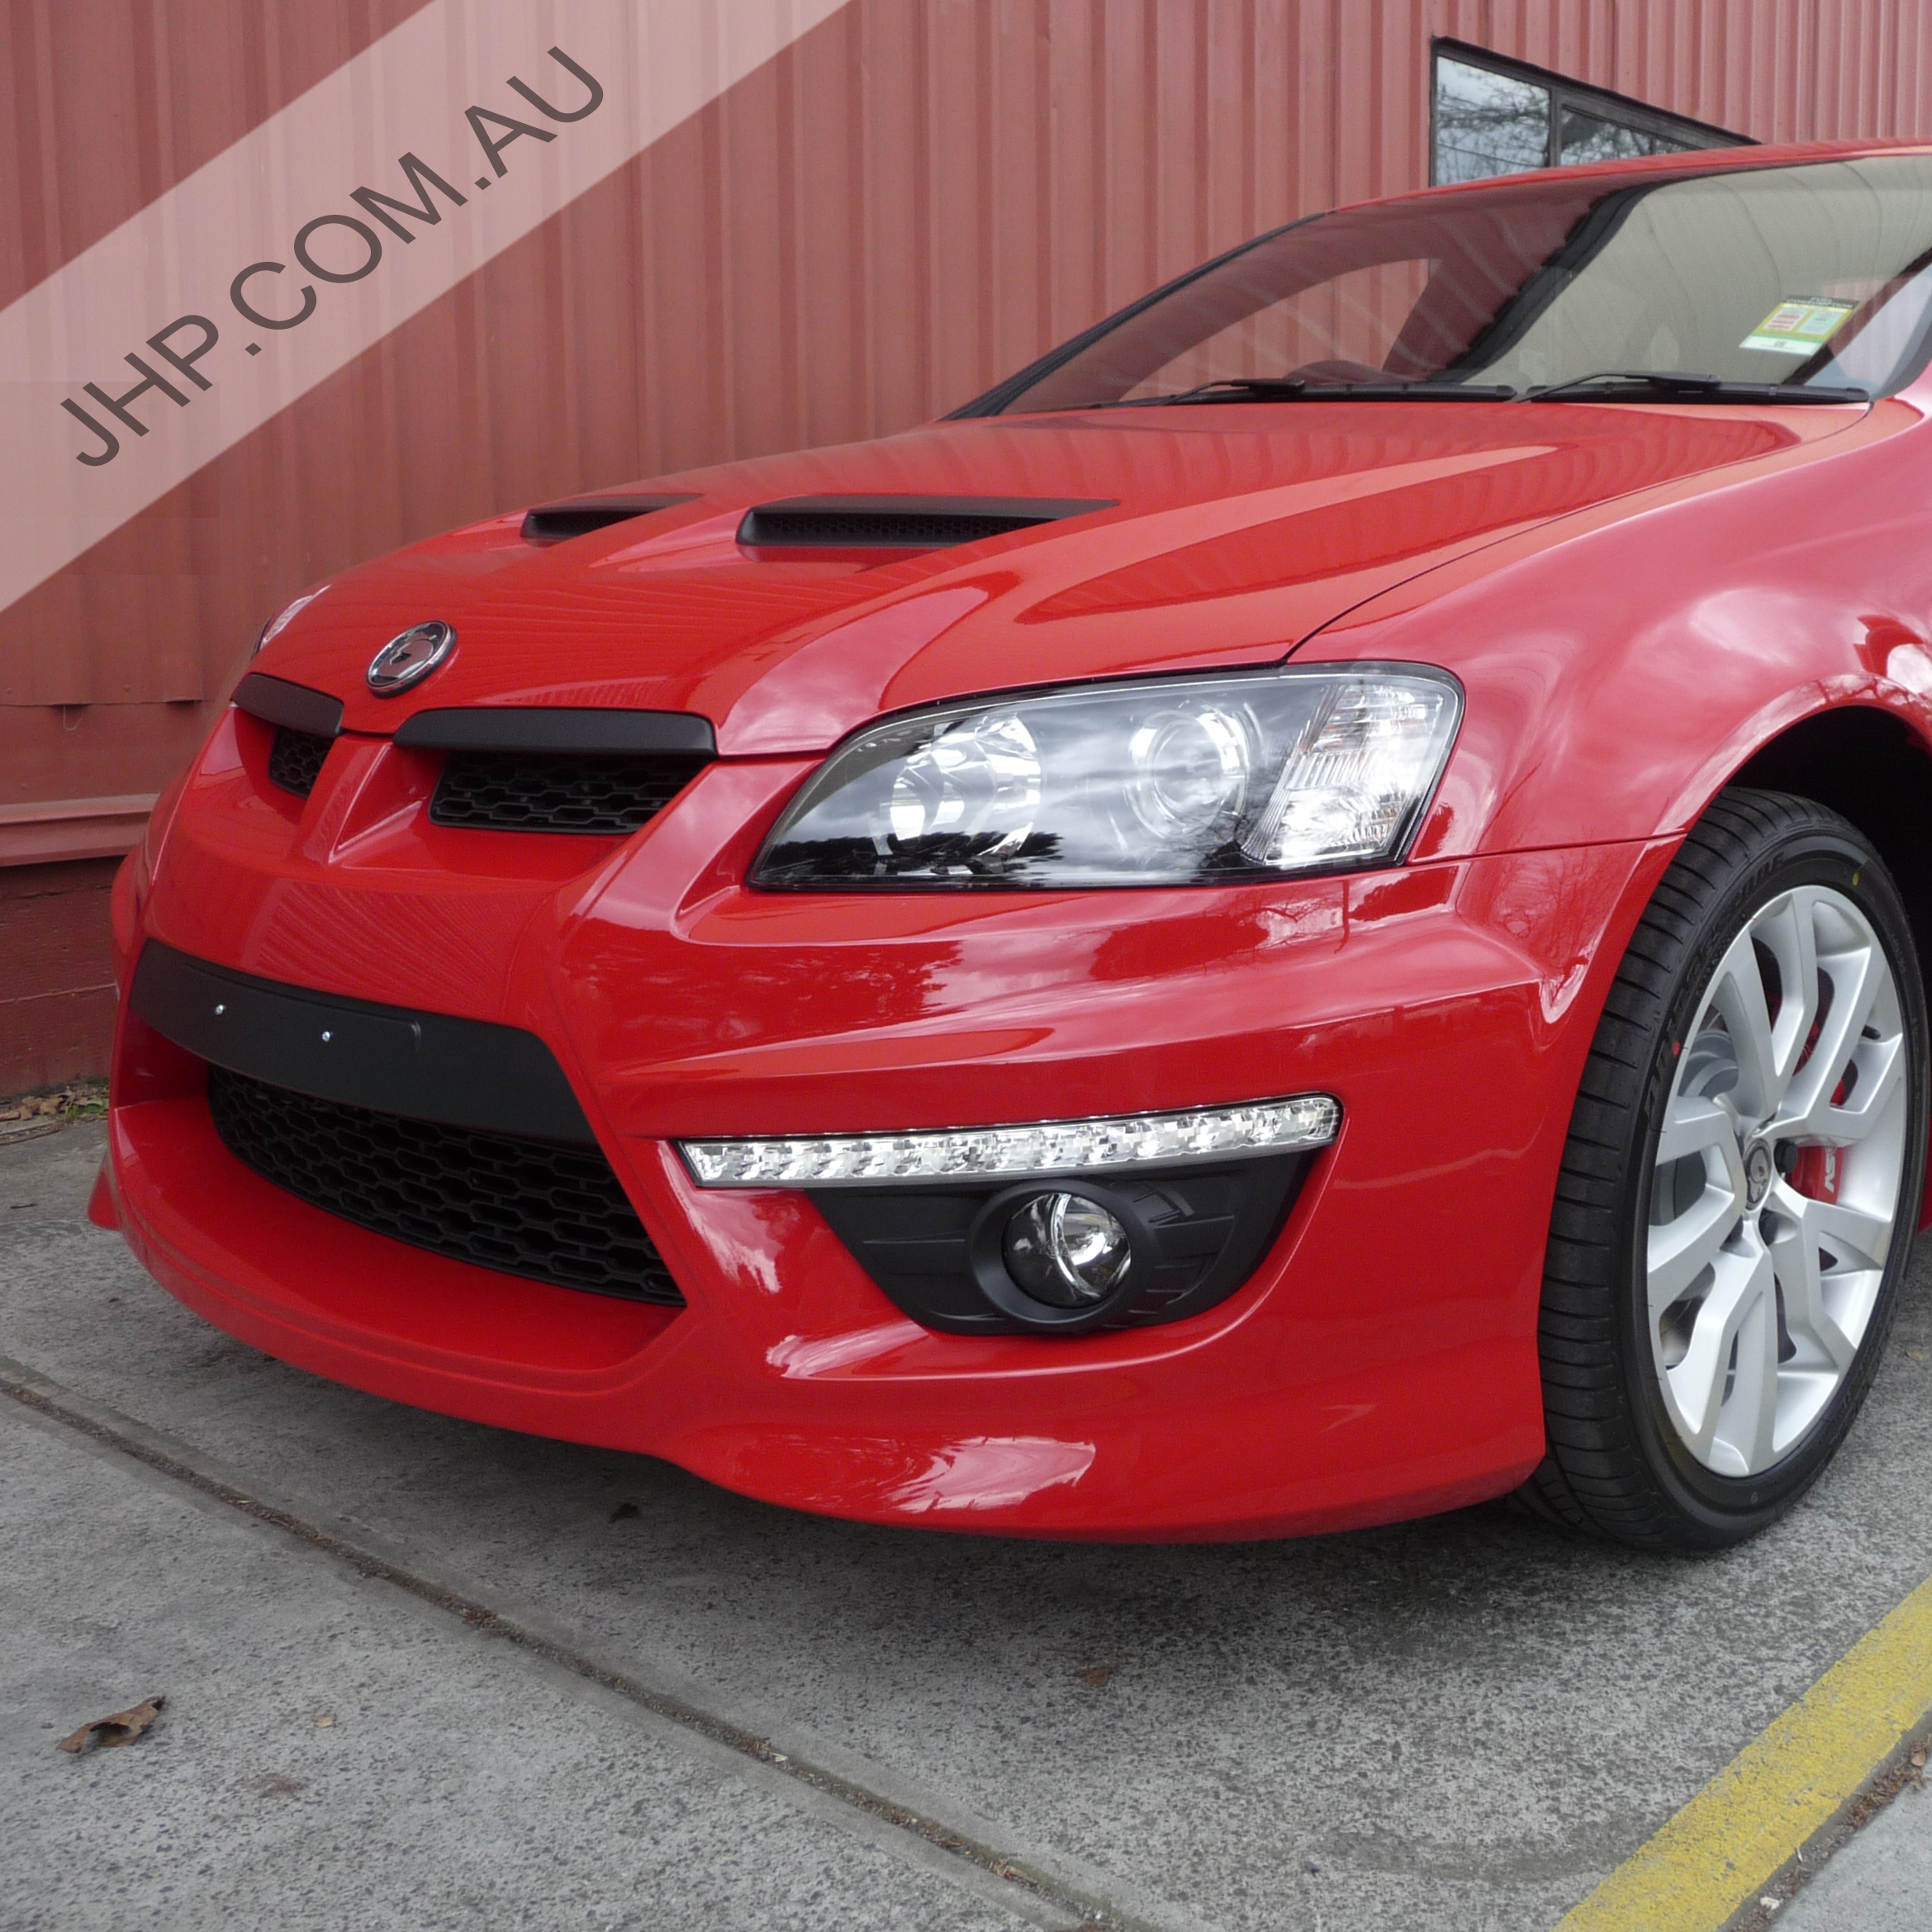 Pontiac G8 HSV Holden Commodore Front Conversion Kit. 